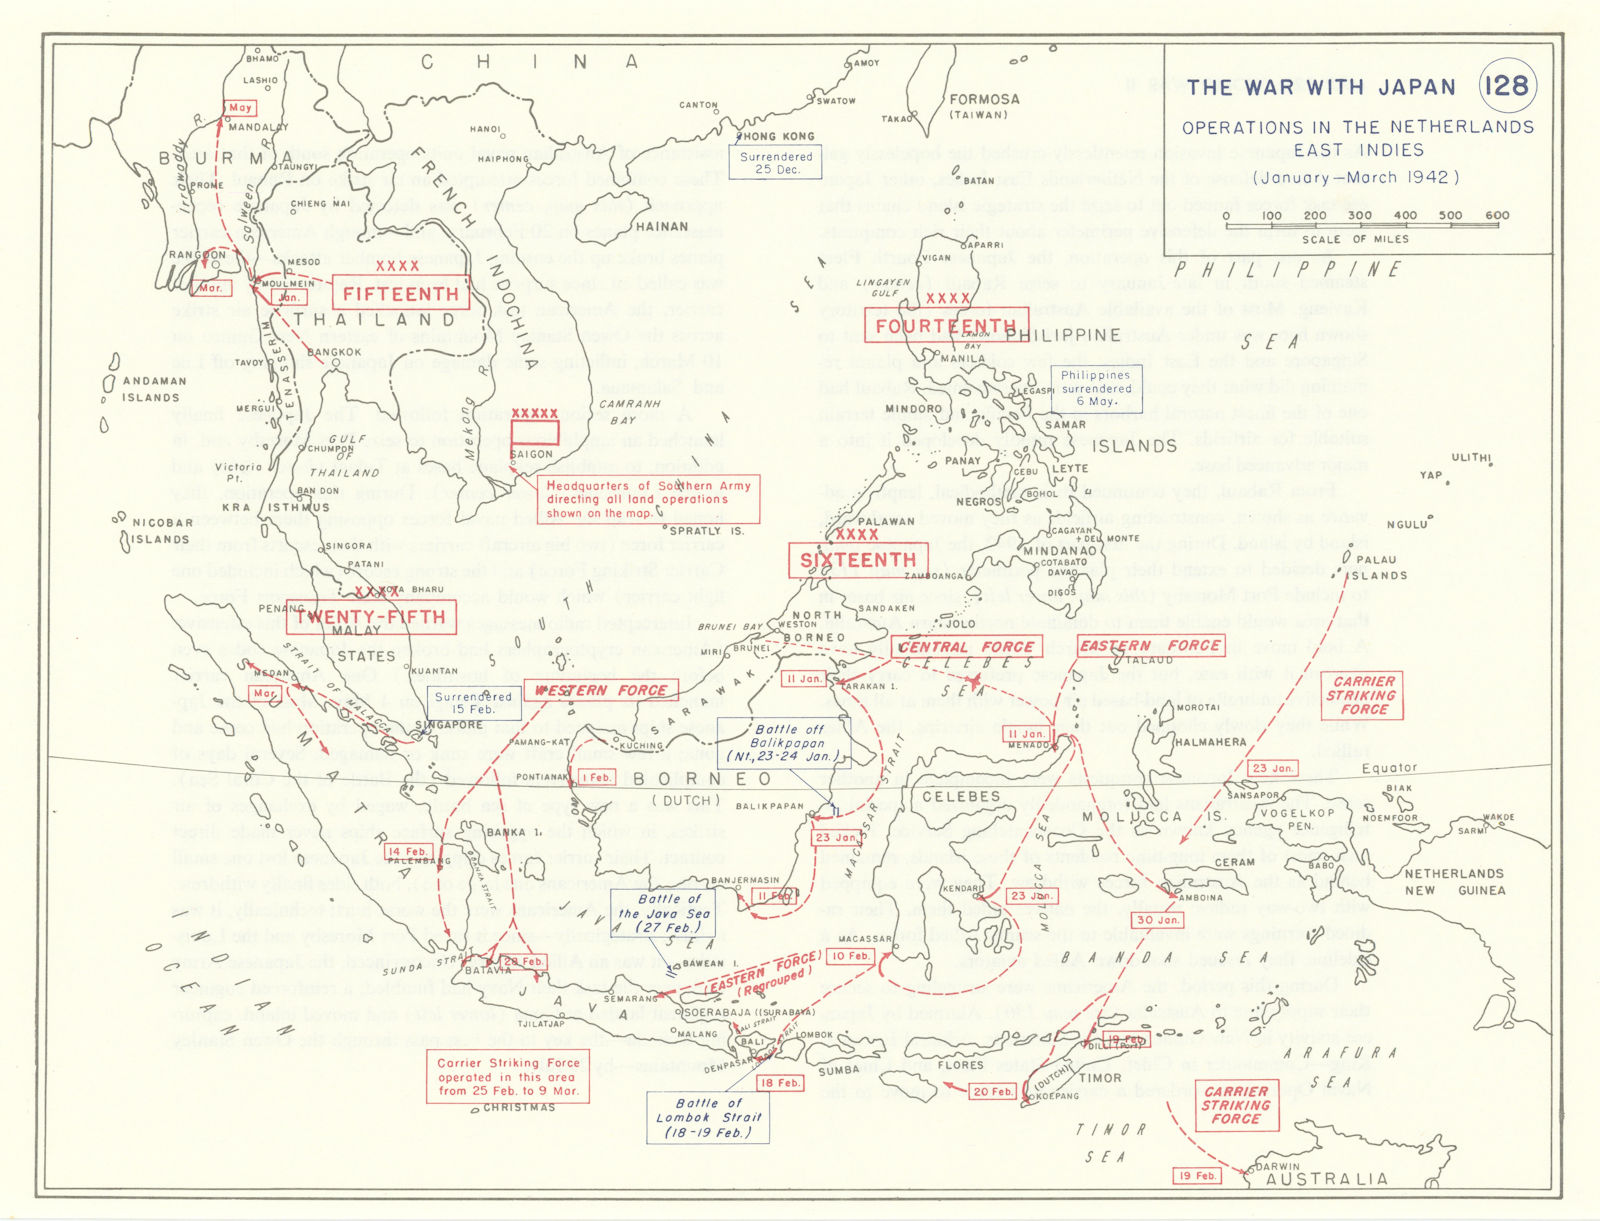 World War 2. Jan-March 1942. Japanese Dutch East Indies Ops. Indonesia 1959 map